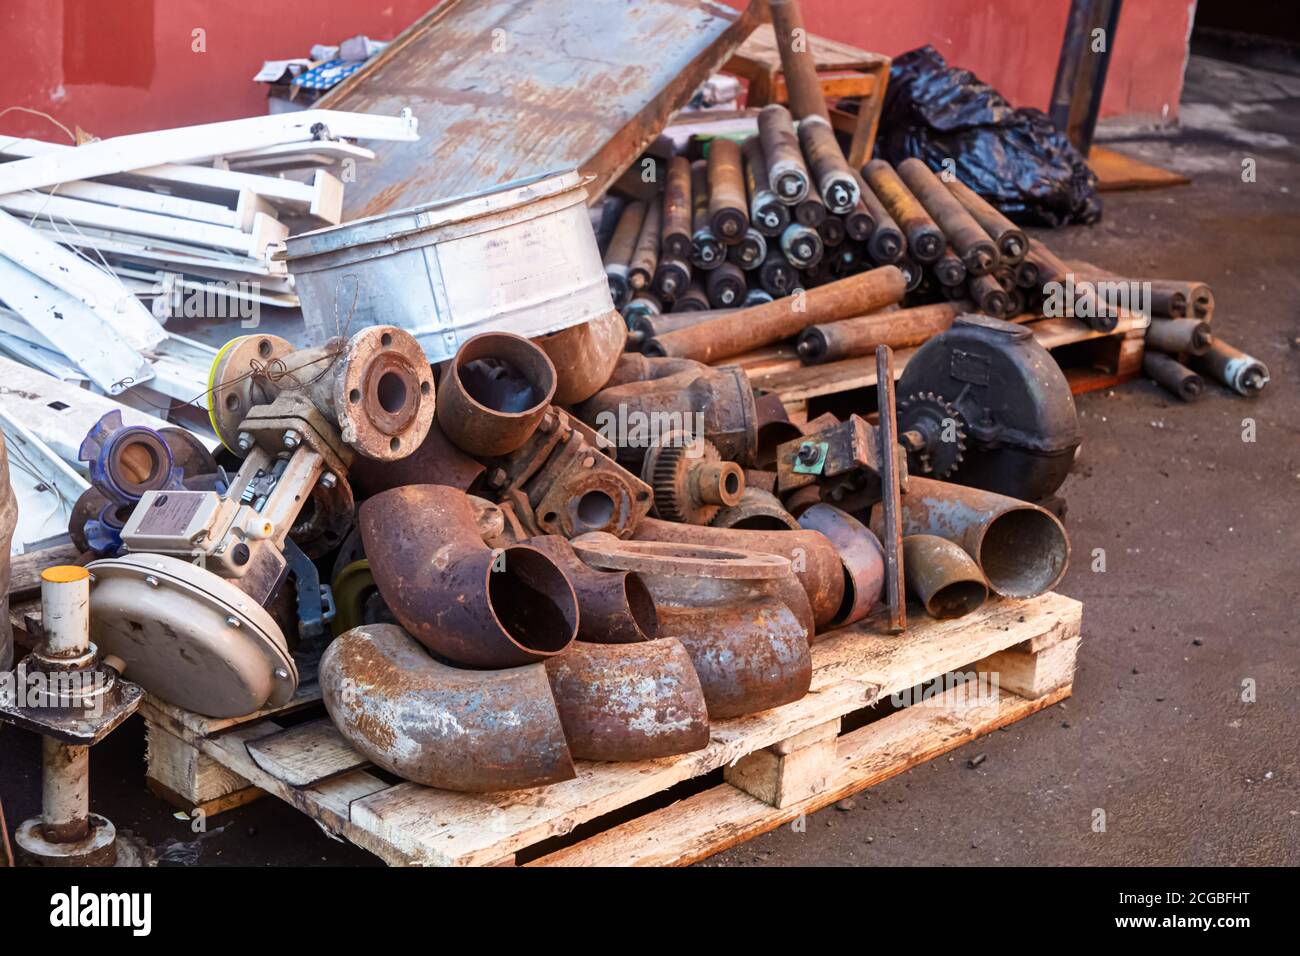 Scraps of old rusty pipes and other old parts lie on the ground. Stock Photo